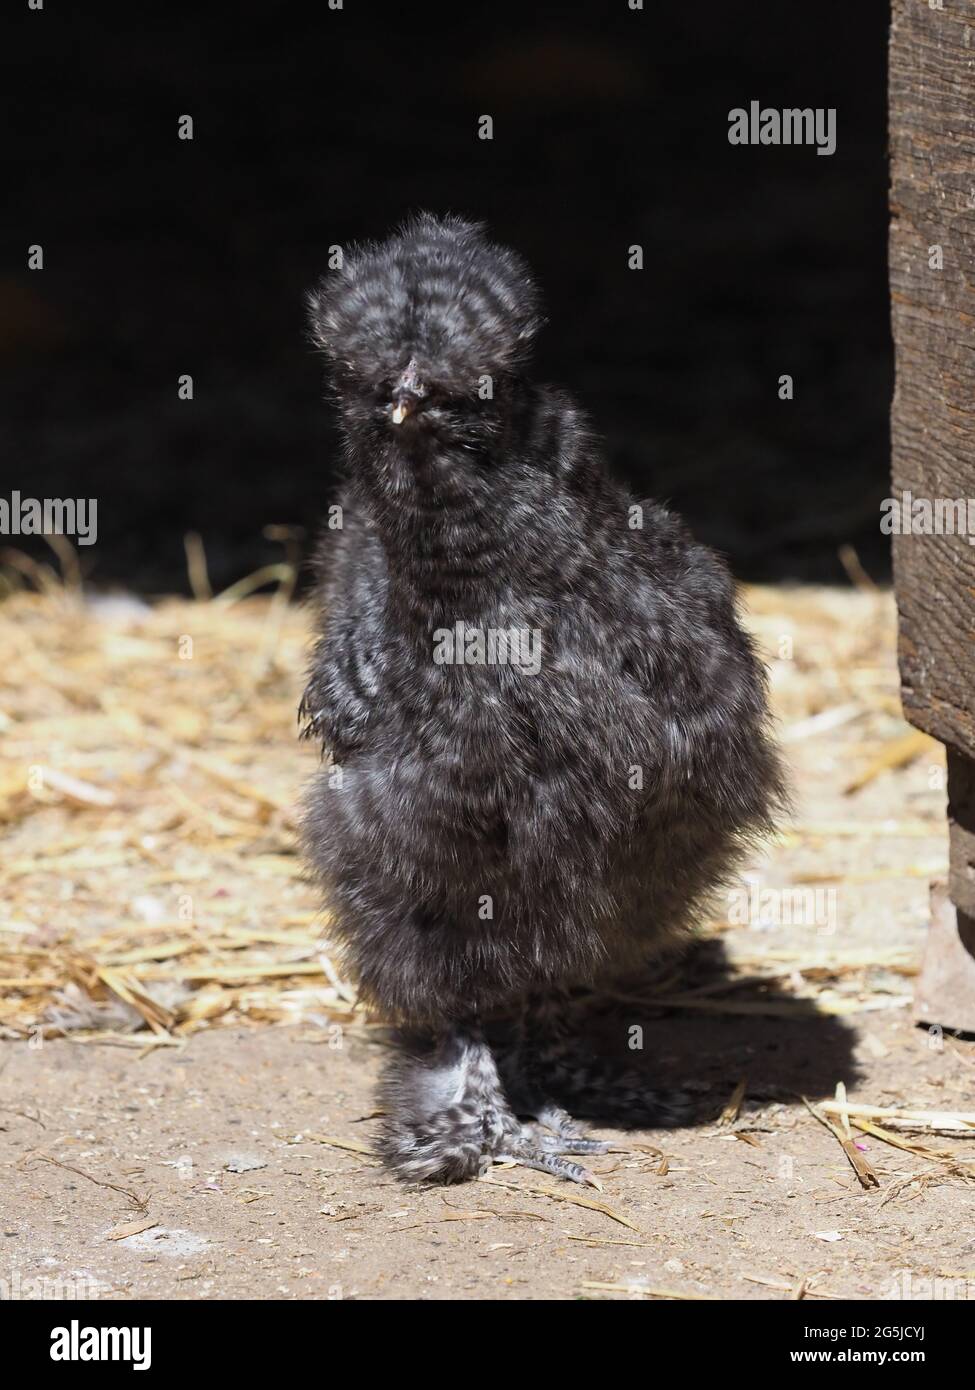 A rare breed chick against a black background. Stock Photo